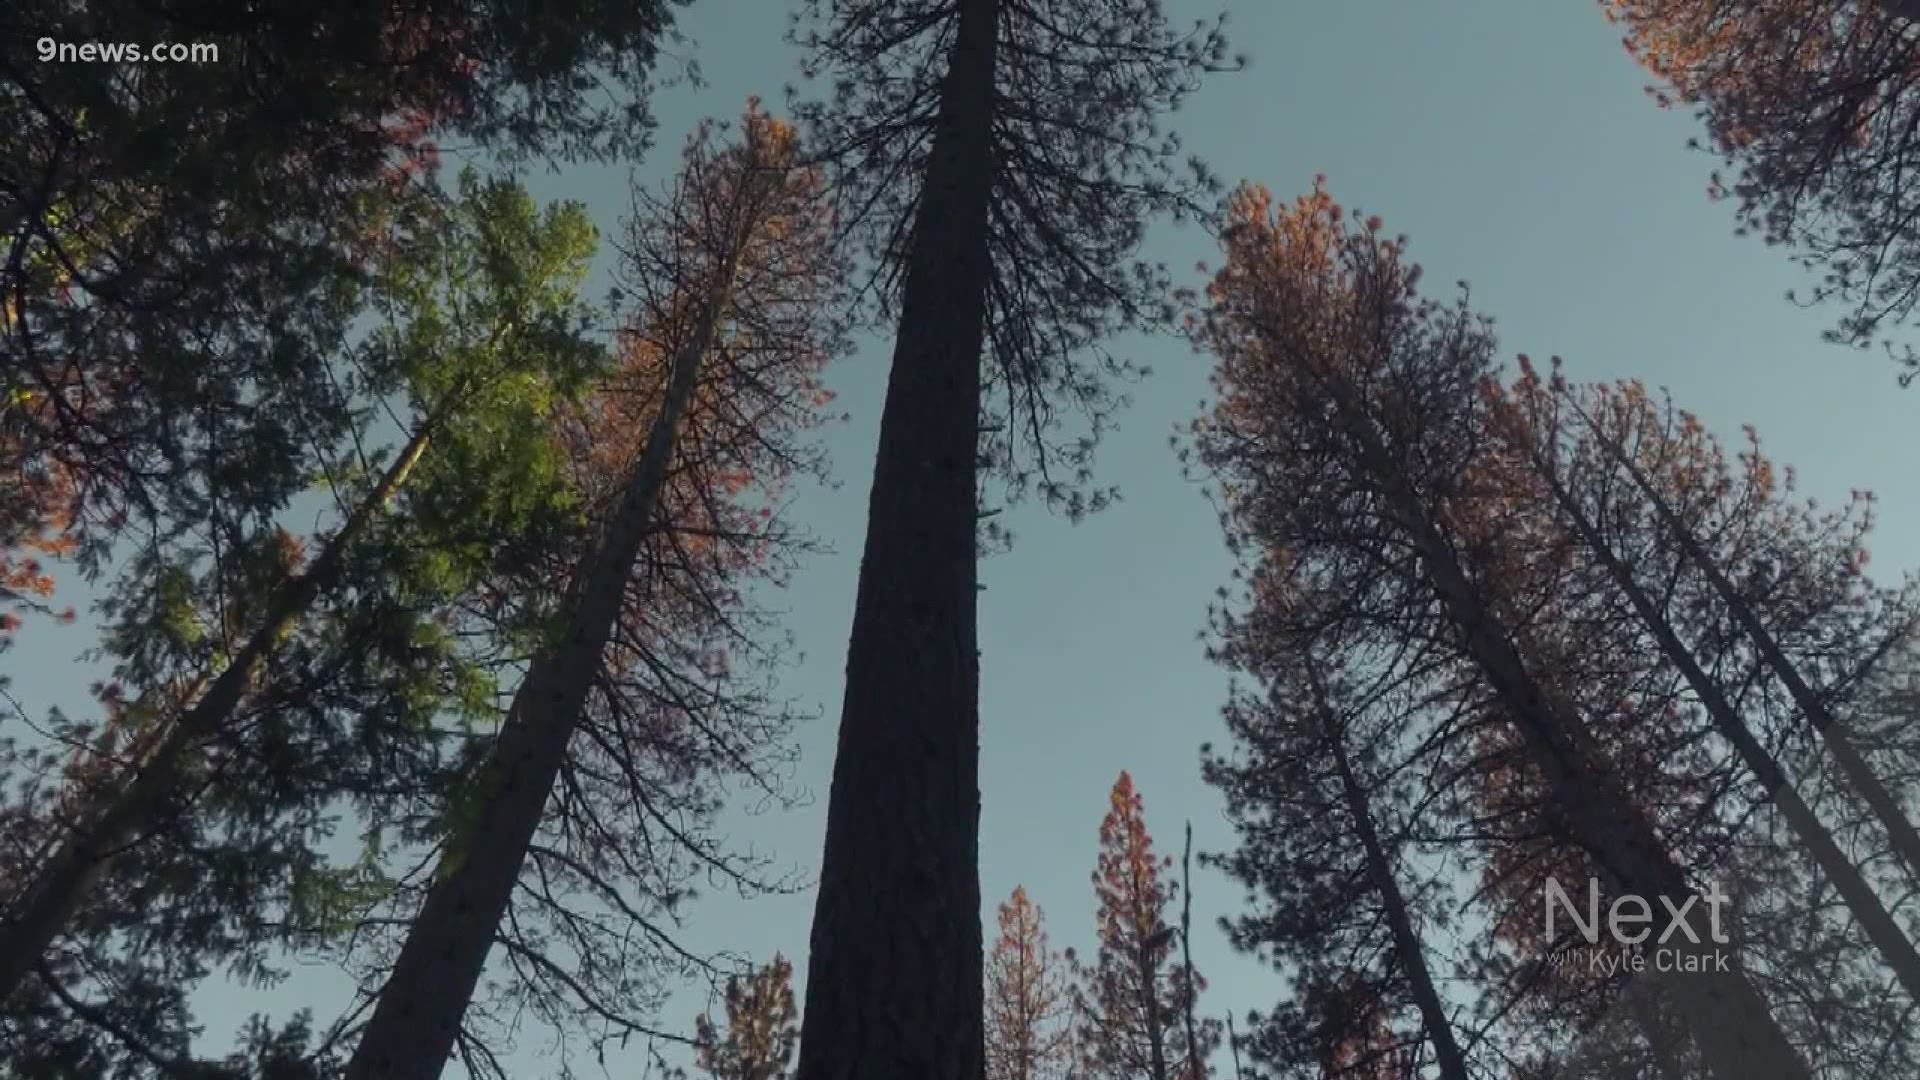 A tall, slender type of tree, known as a Lodgepole Pine, is native to Colorado and actually needs fire to survive.